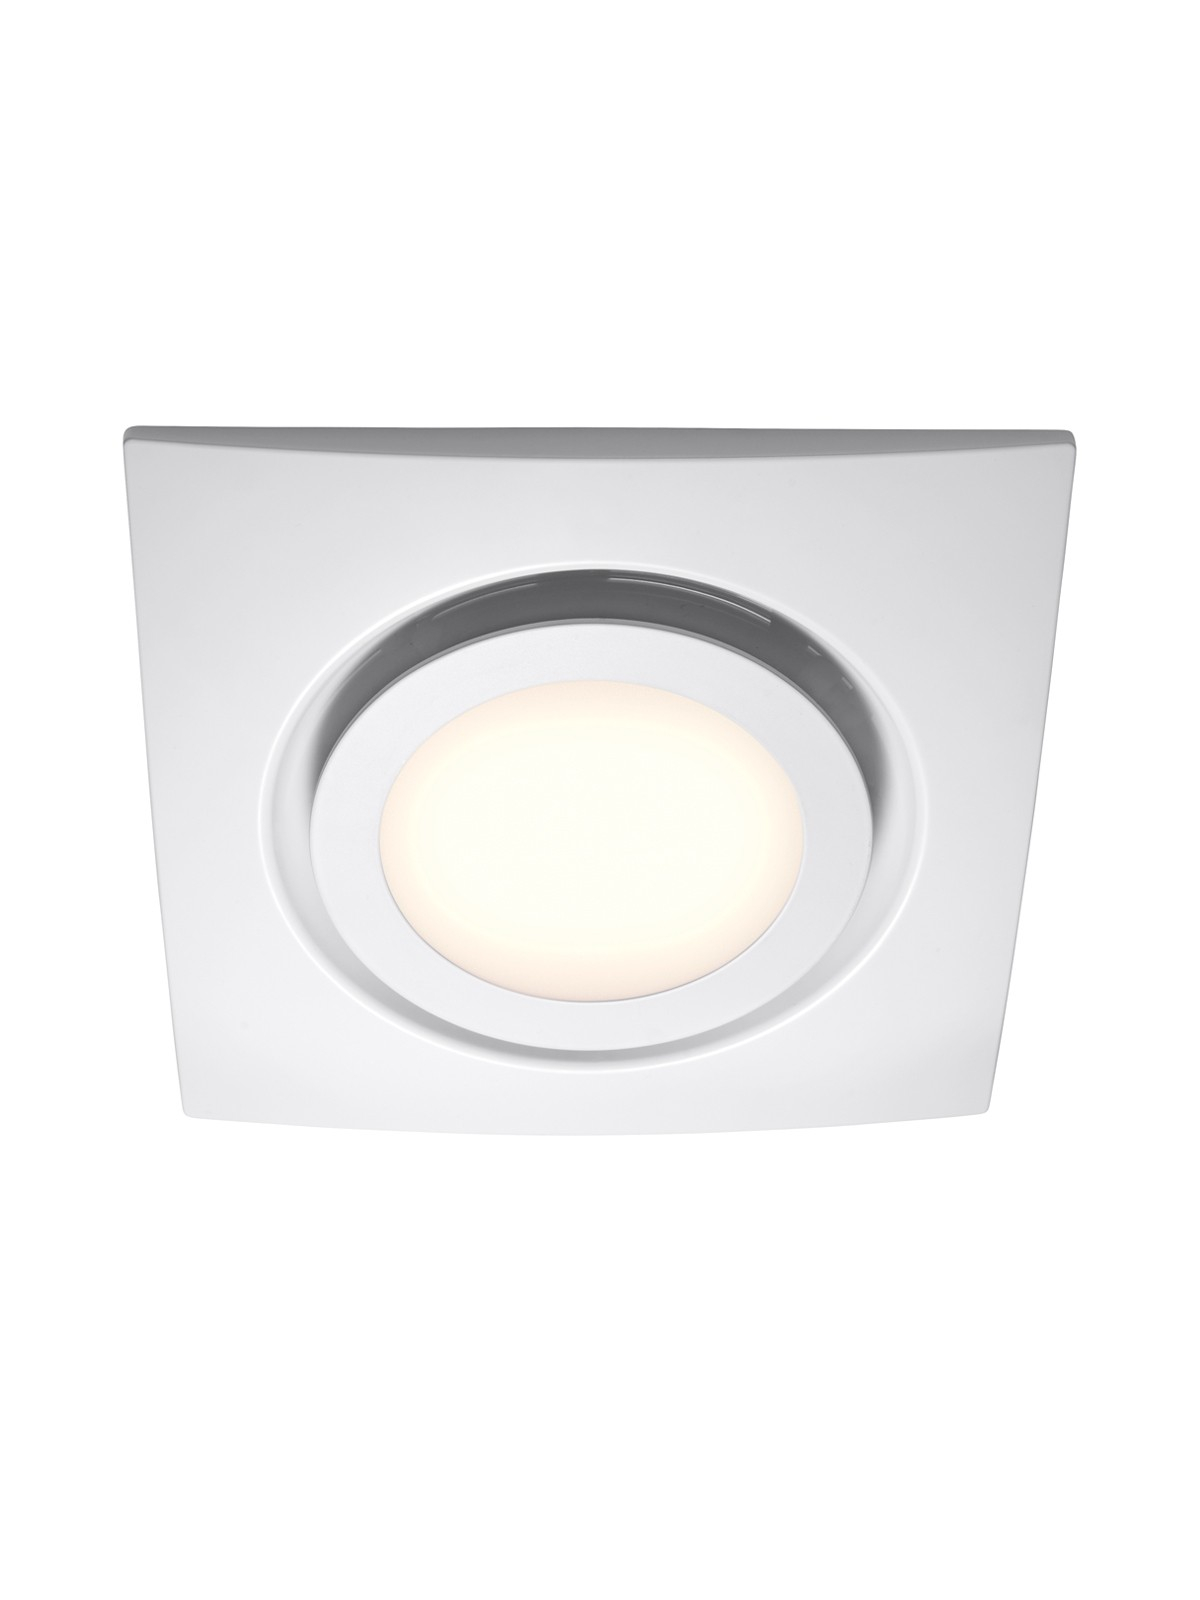 White Exhaust Fan With Led Light within sizing 1200 X 1600